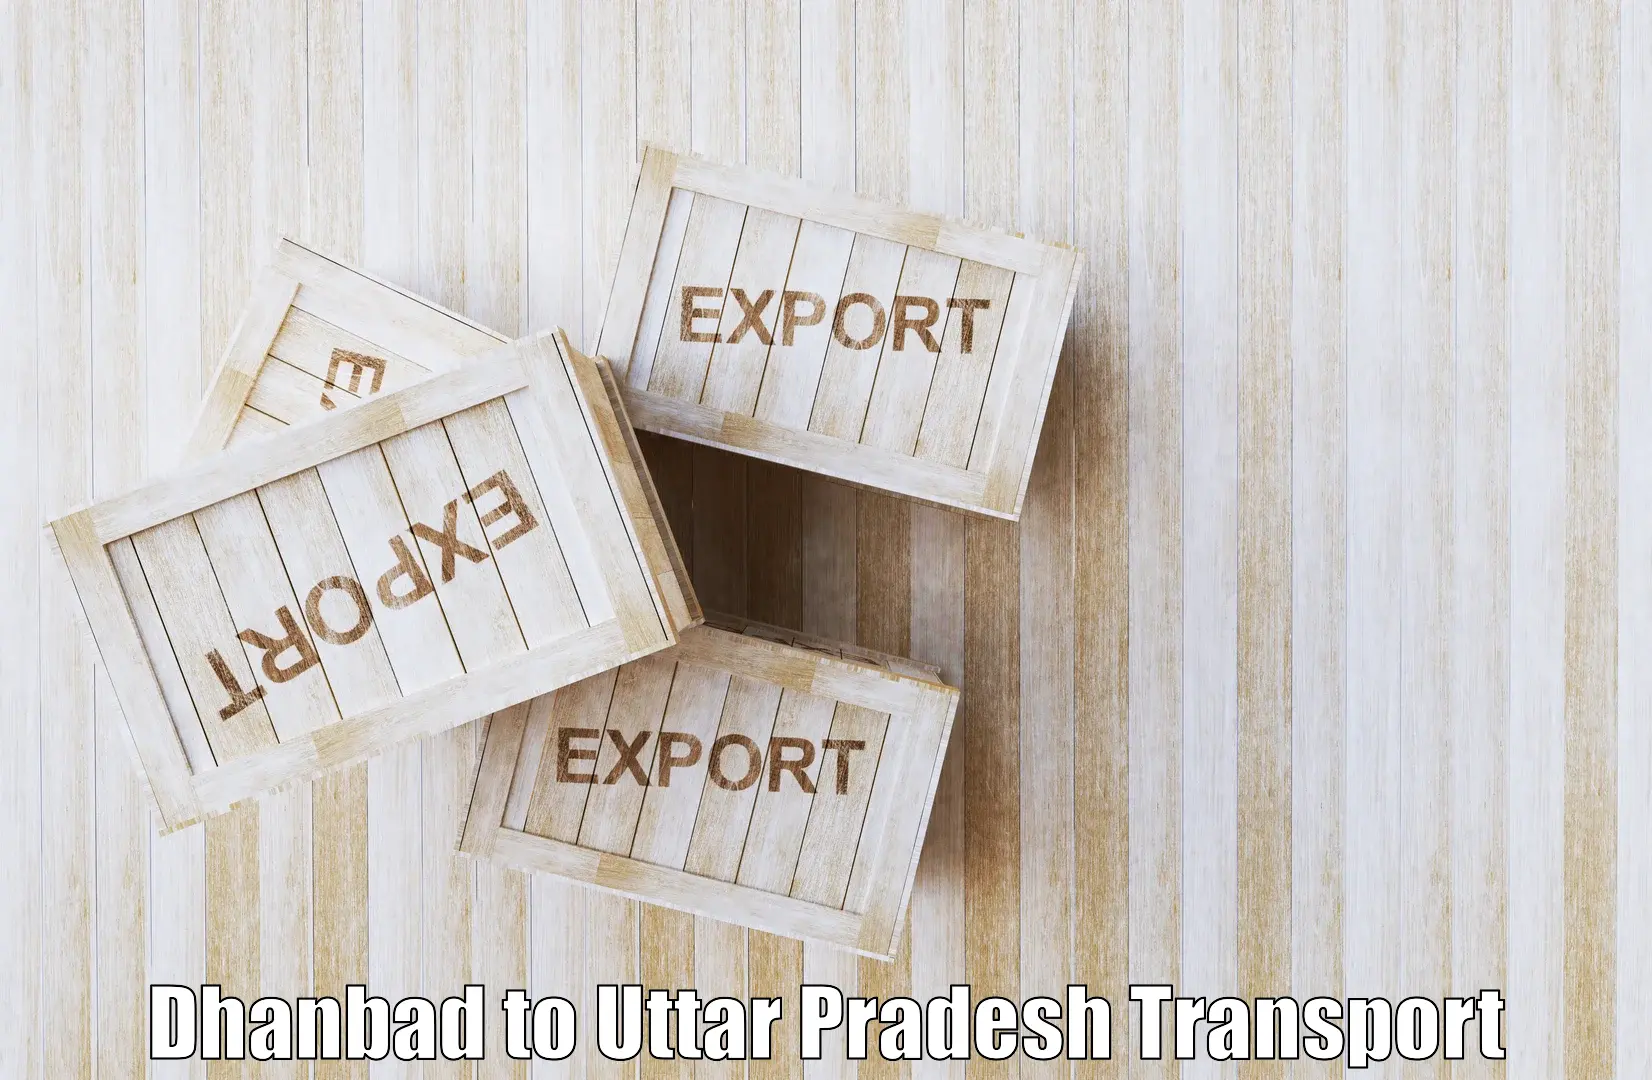 Nearest transport service Dhanbad to Unnao